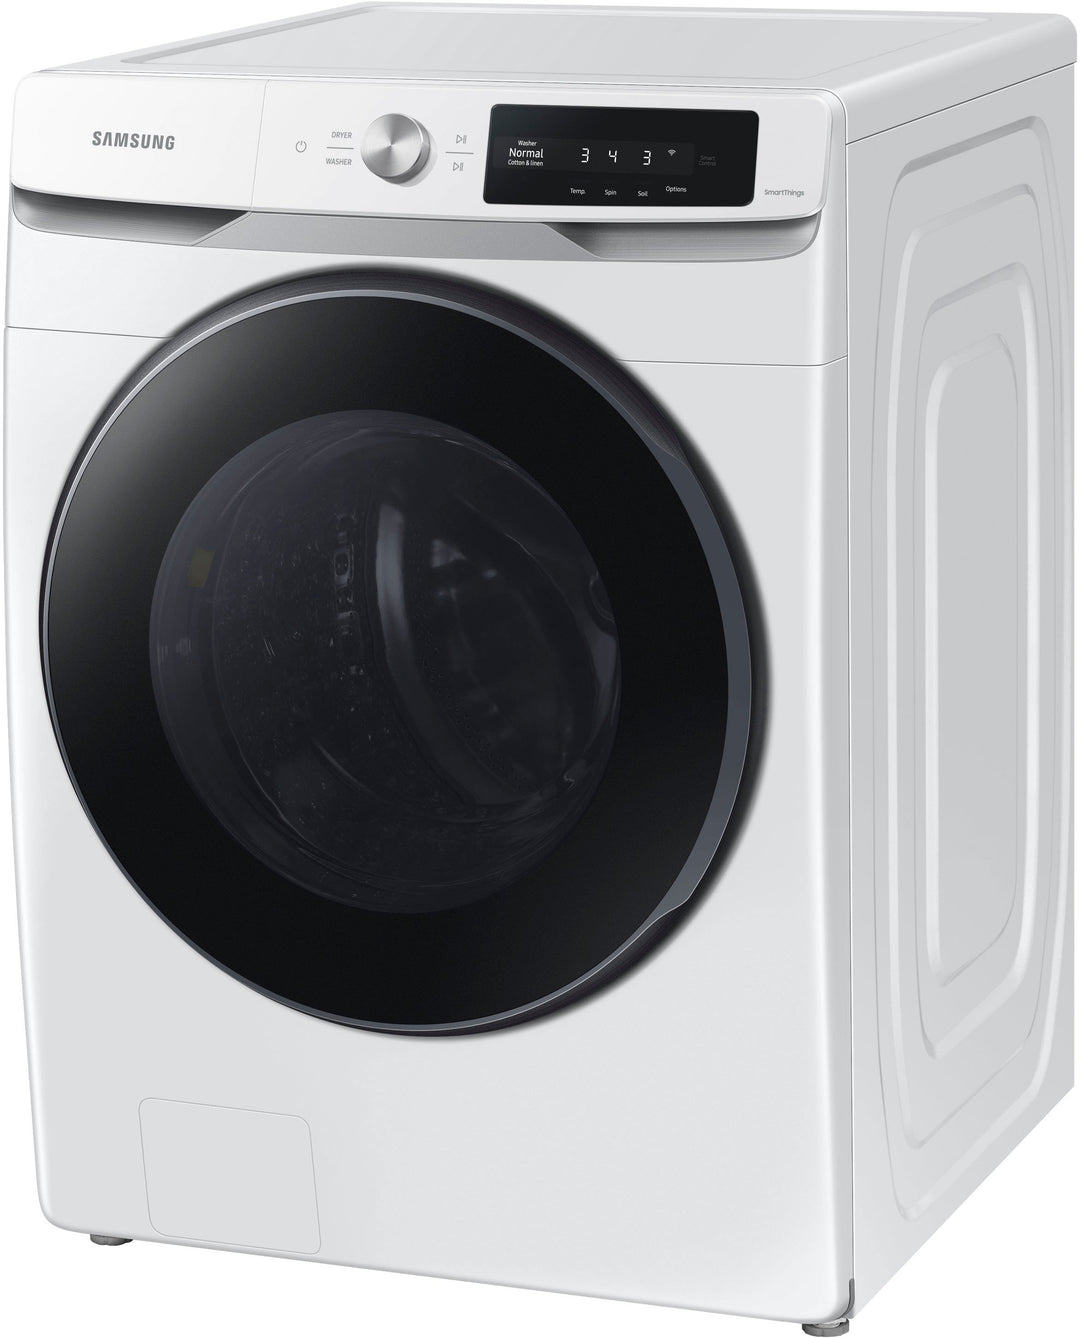 Samsung - 4.5 cu. ft. Large Capacity Smart Dial Front Load Washer with Super Speed Wash - White_4